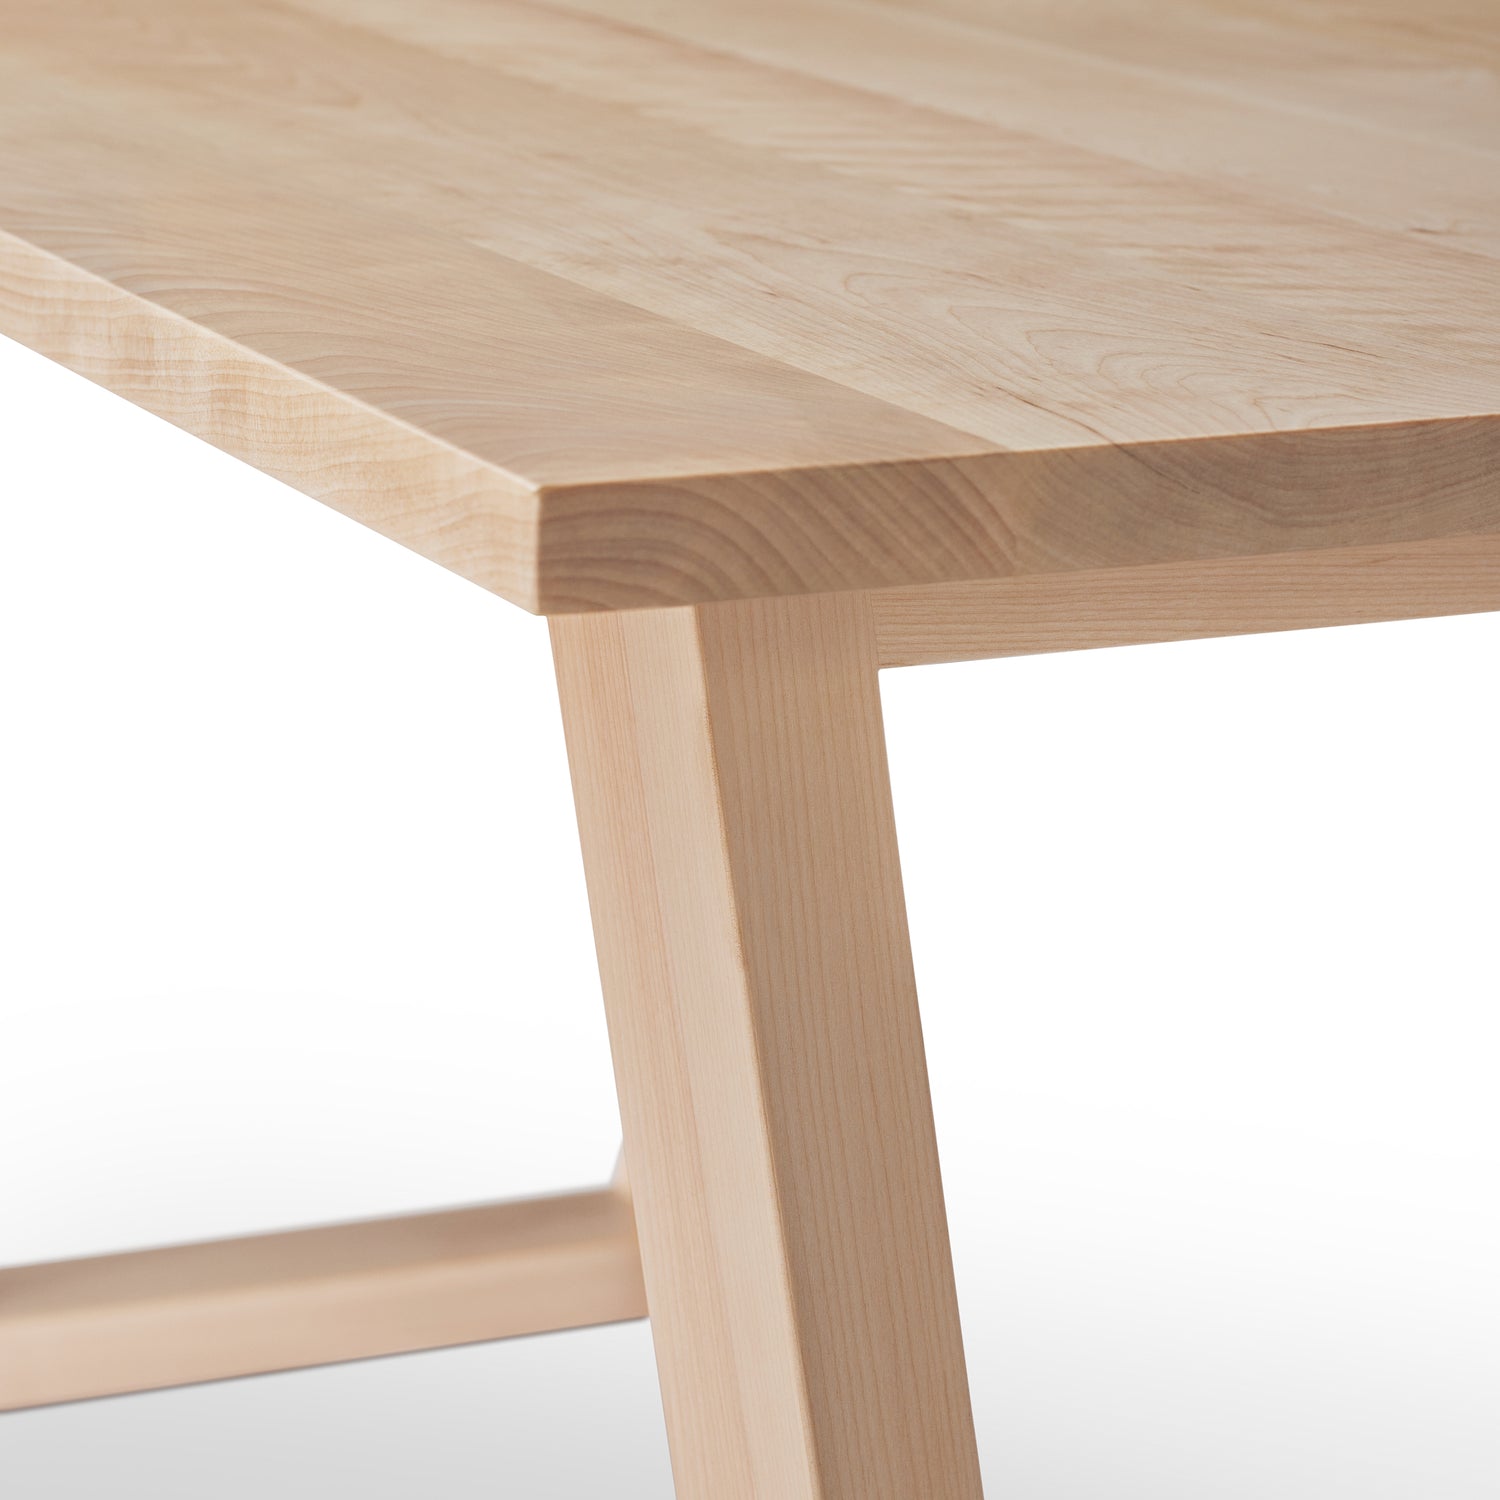 «V» cherry wood table - 66 x 36 in. - 2644